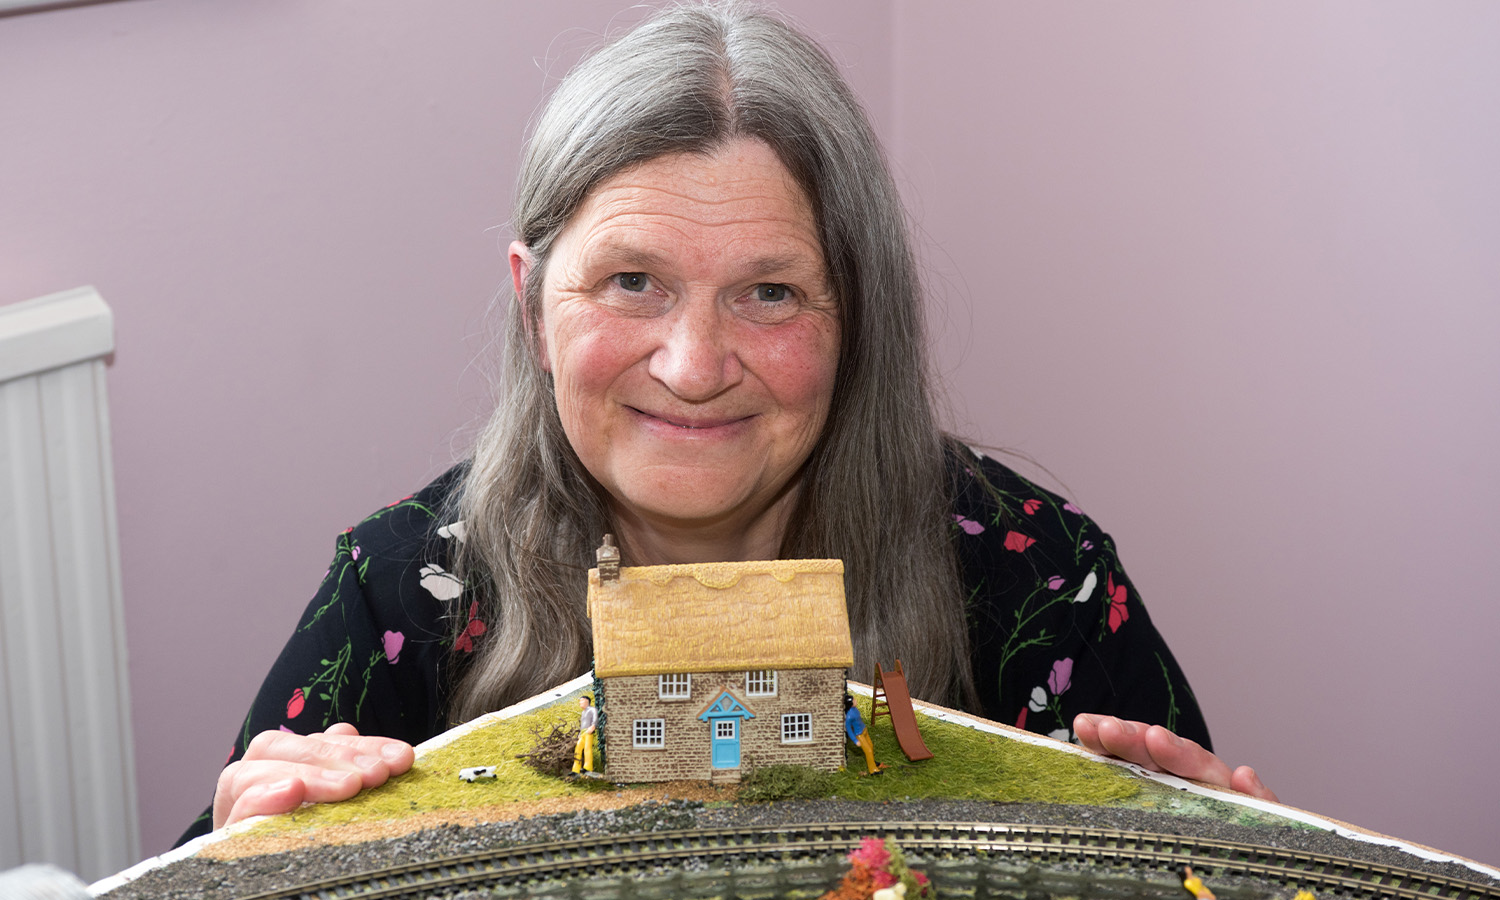 HOME SWEET HOME: Sally with model of dream cottage she'd love